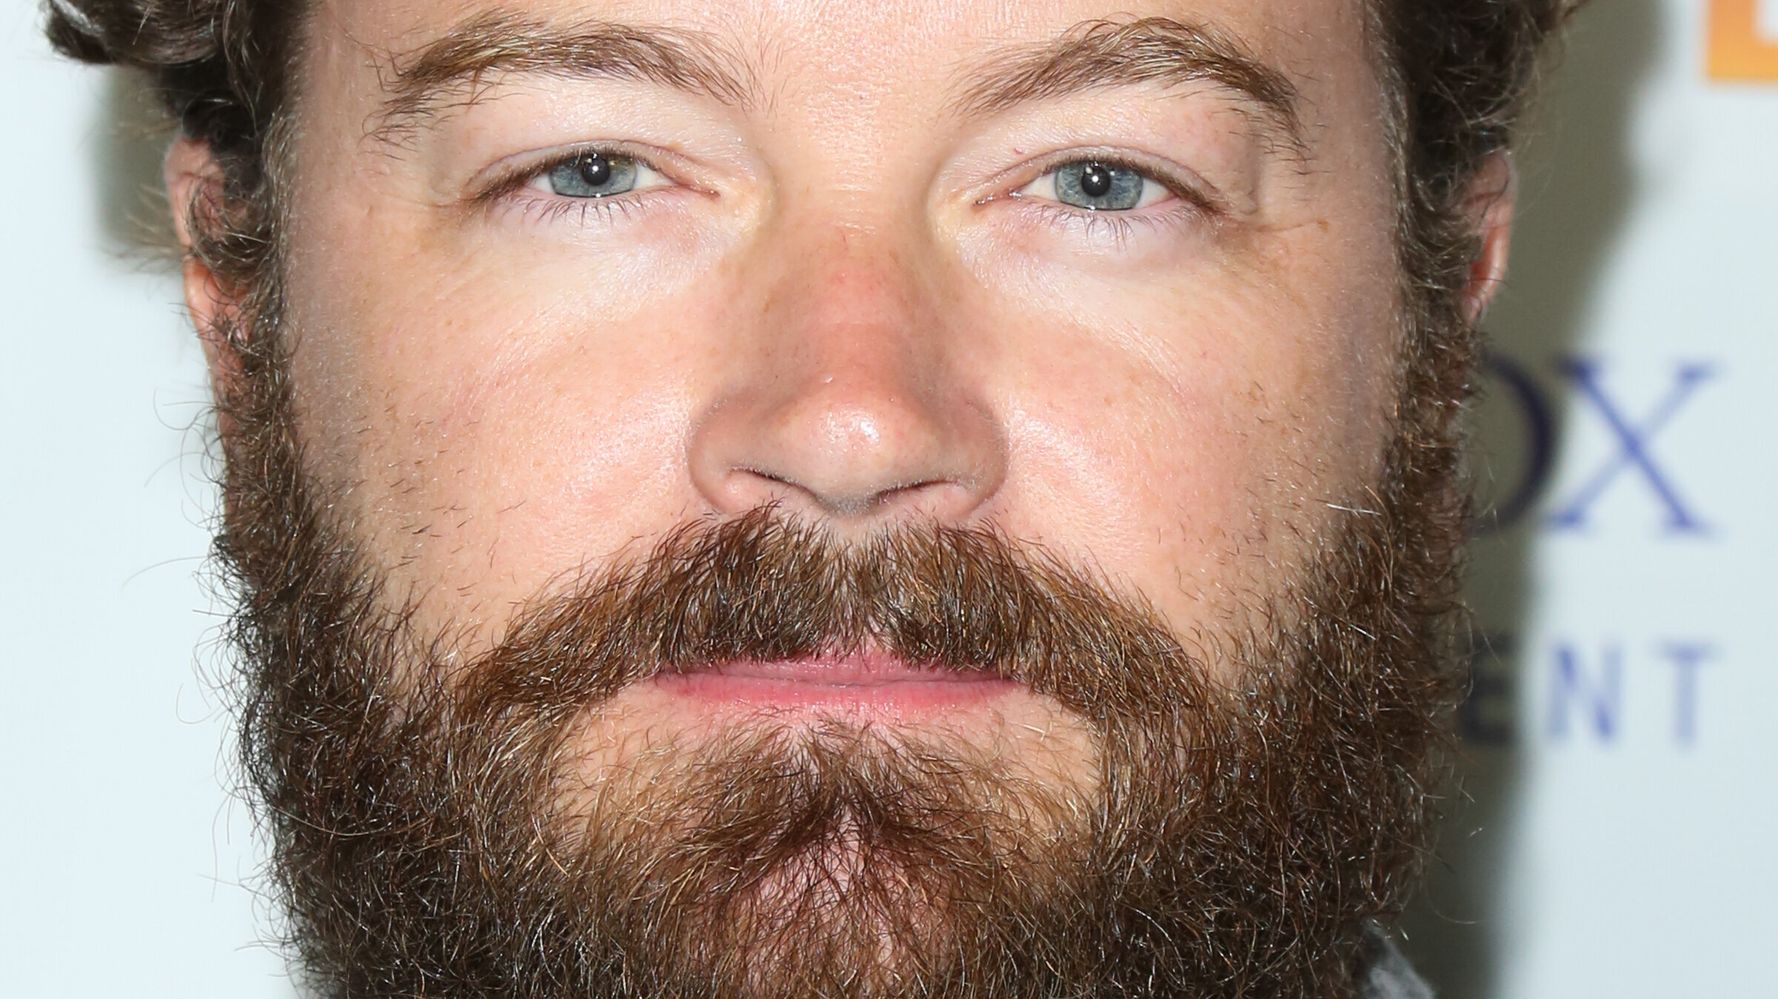 Woman Testifies Danny Masterson Raped Her Even After She Set Boundaries